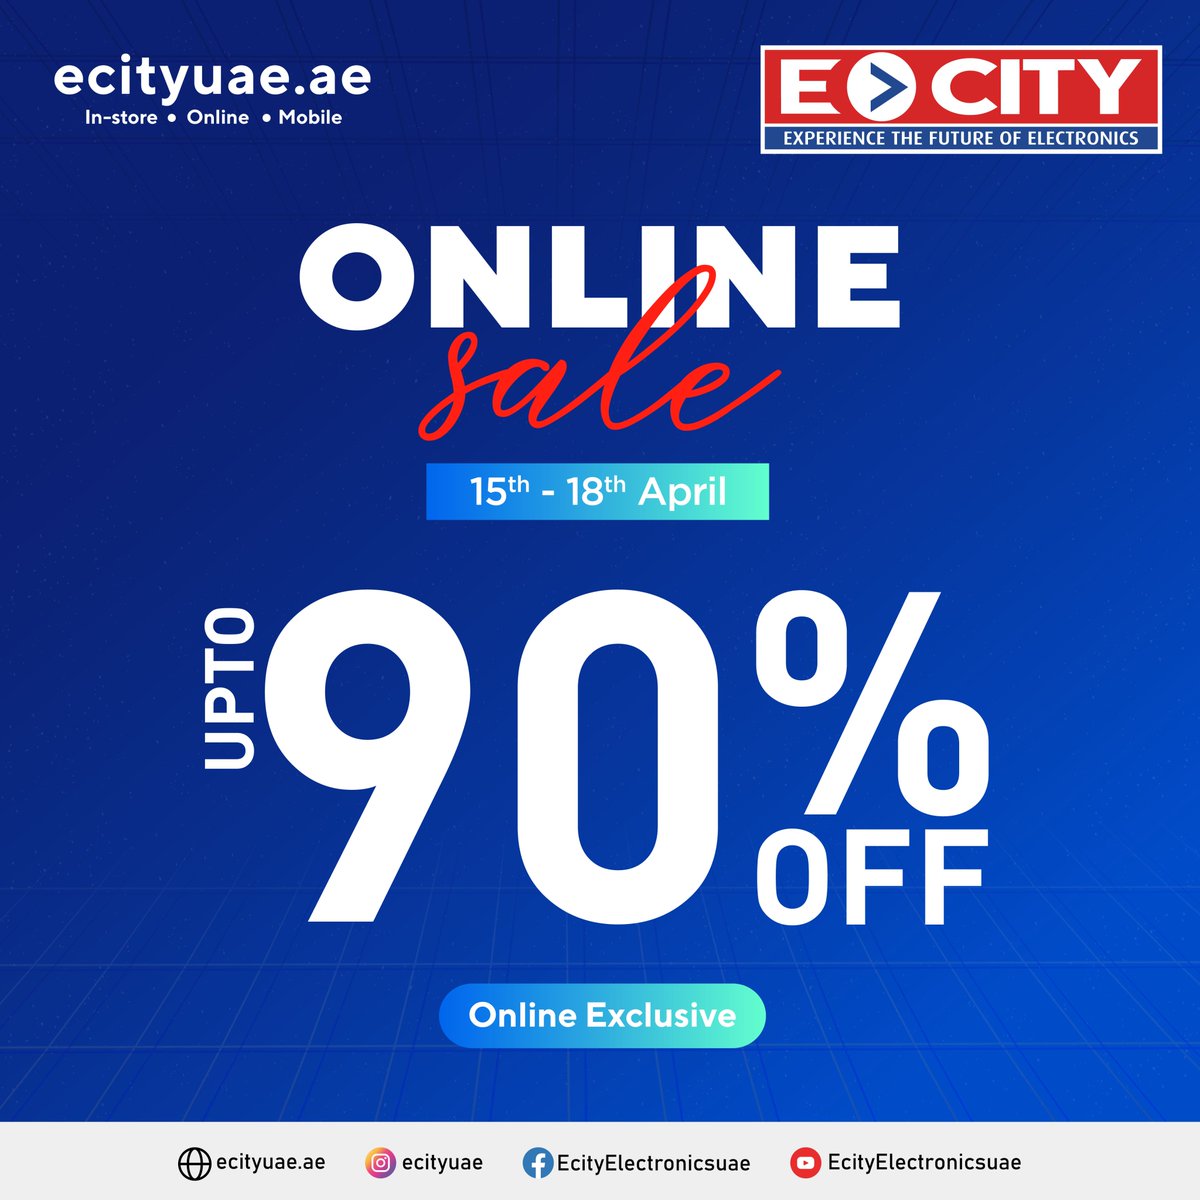 Hurry! Our 3-day Online Sale is now live at Ecity! Get up to 90% off on smartphones, laptops, accessories, appliances, and more.

Shop Now : ecityuae.ae/online-sale/

#onlinesale #uae #sale #electronics #dubai #abudhabi #sharjah #ajman